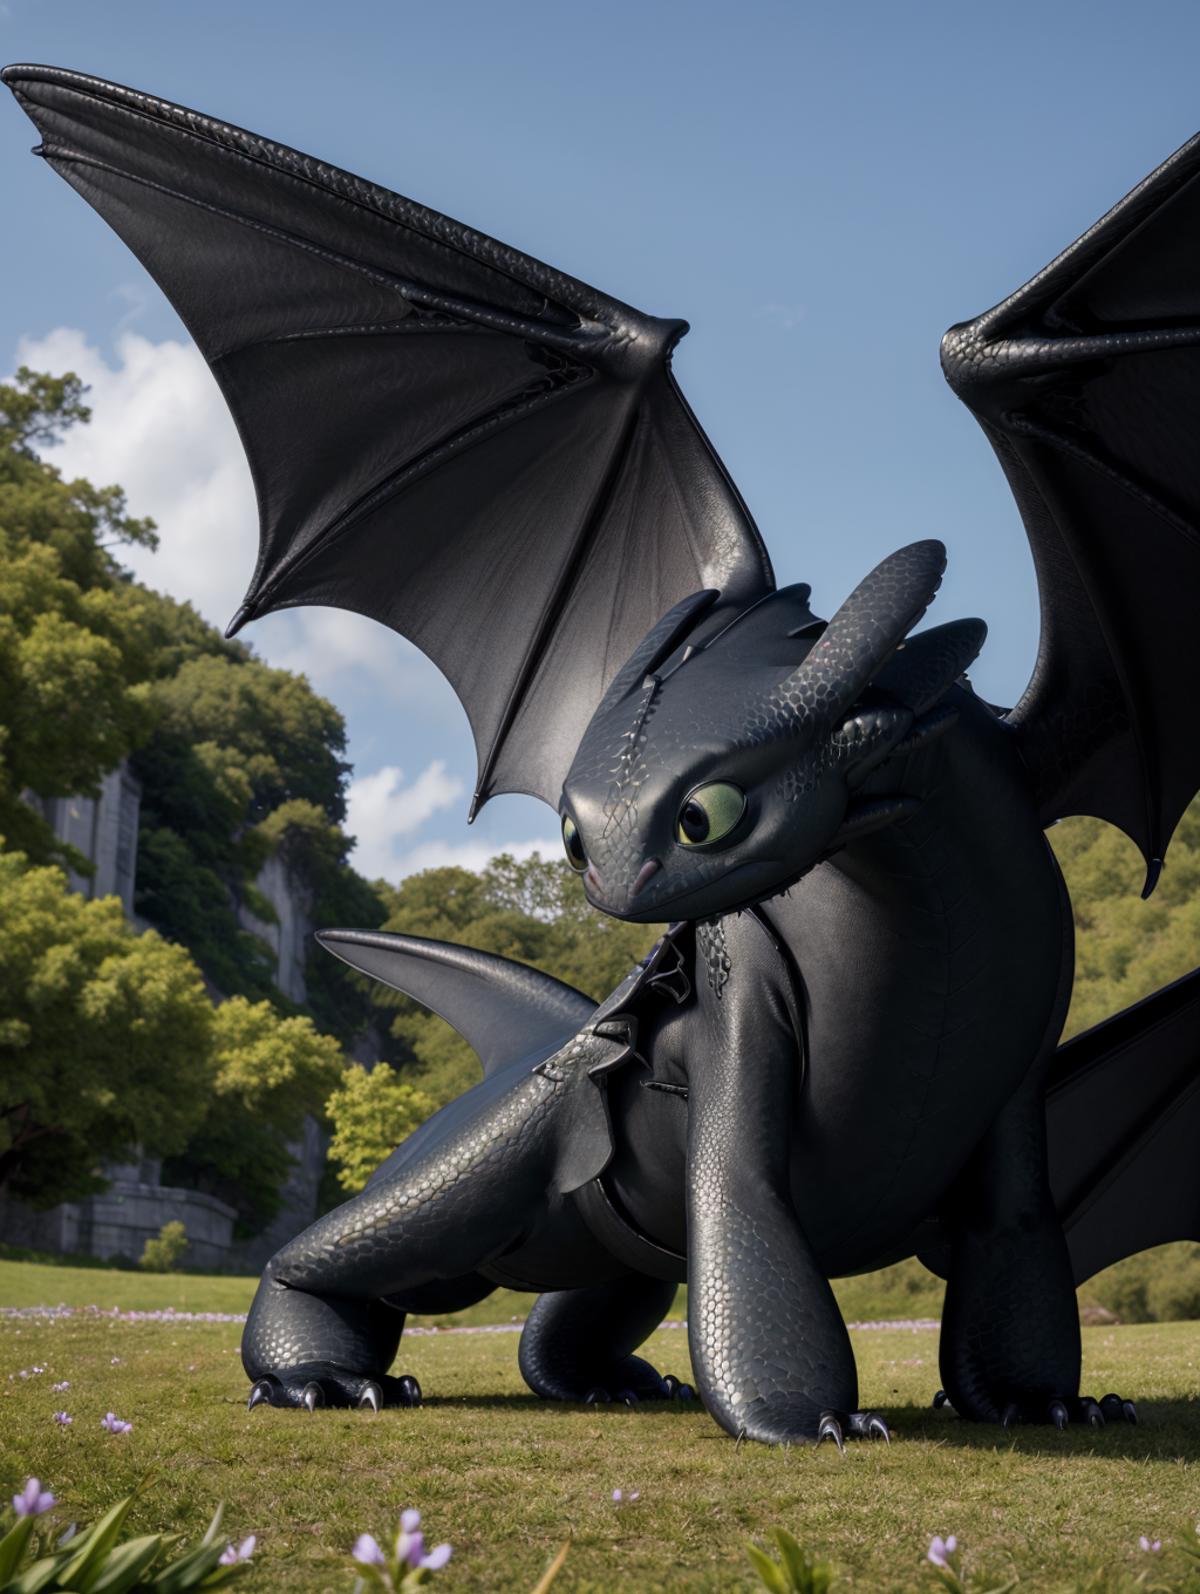 How To Train Your Dragon (People + Toothless)  image by Avenka